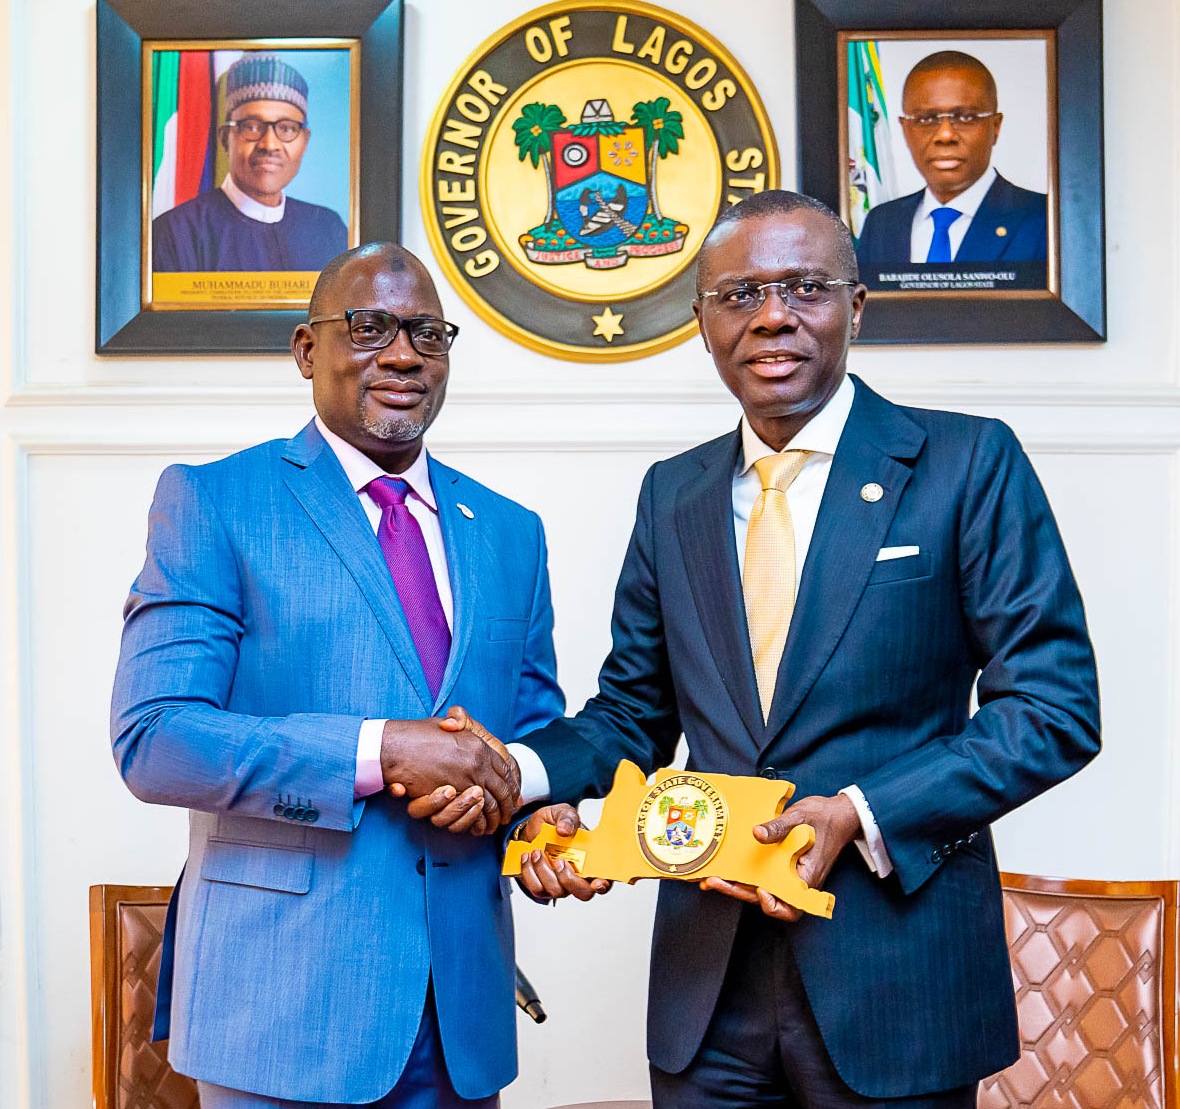 L-R: Chairman, Federal Inland Revenue Service (FIRS), Mr. Muhammad Mamman Nami, receiving a plaque from Lagos State Governor, Mr. Babajide Sanwo-Olu during a courtesy visit to the Governor at Lagos House, Alausa, Ikeja, on Tuesday, February 18, 2020.